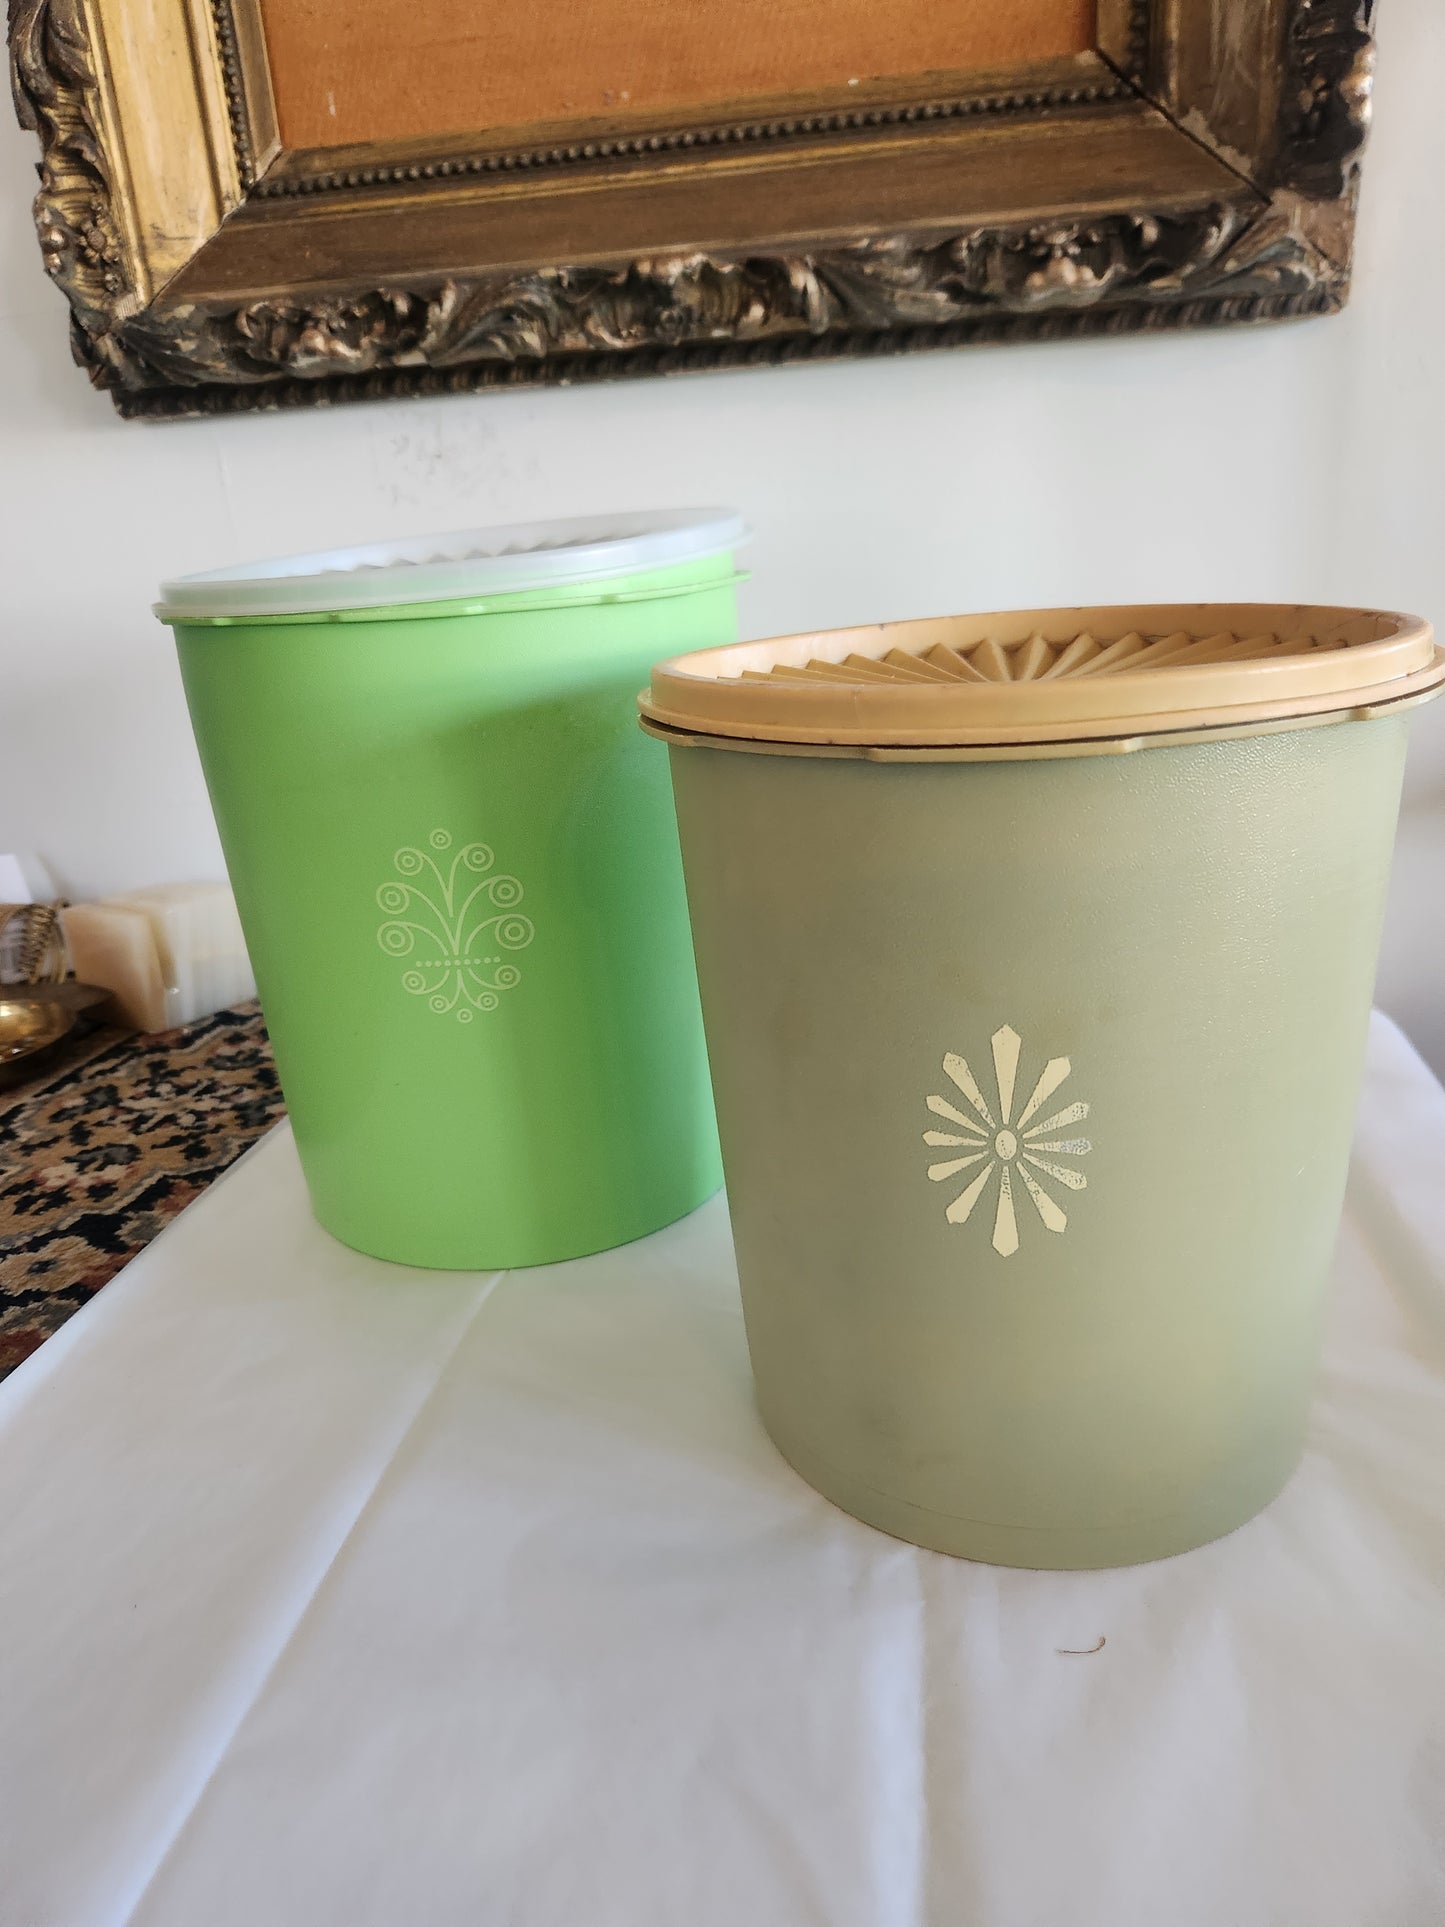 Vintage Tupperware Canisters